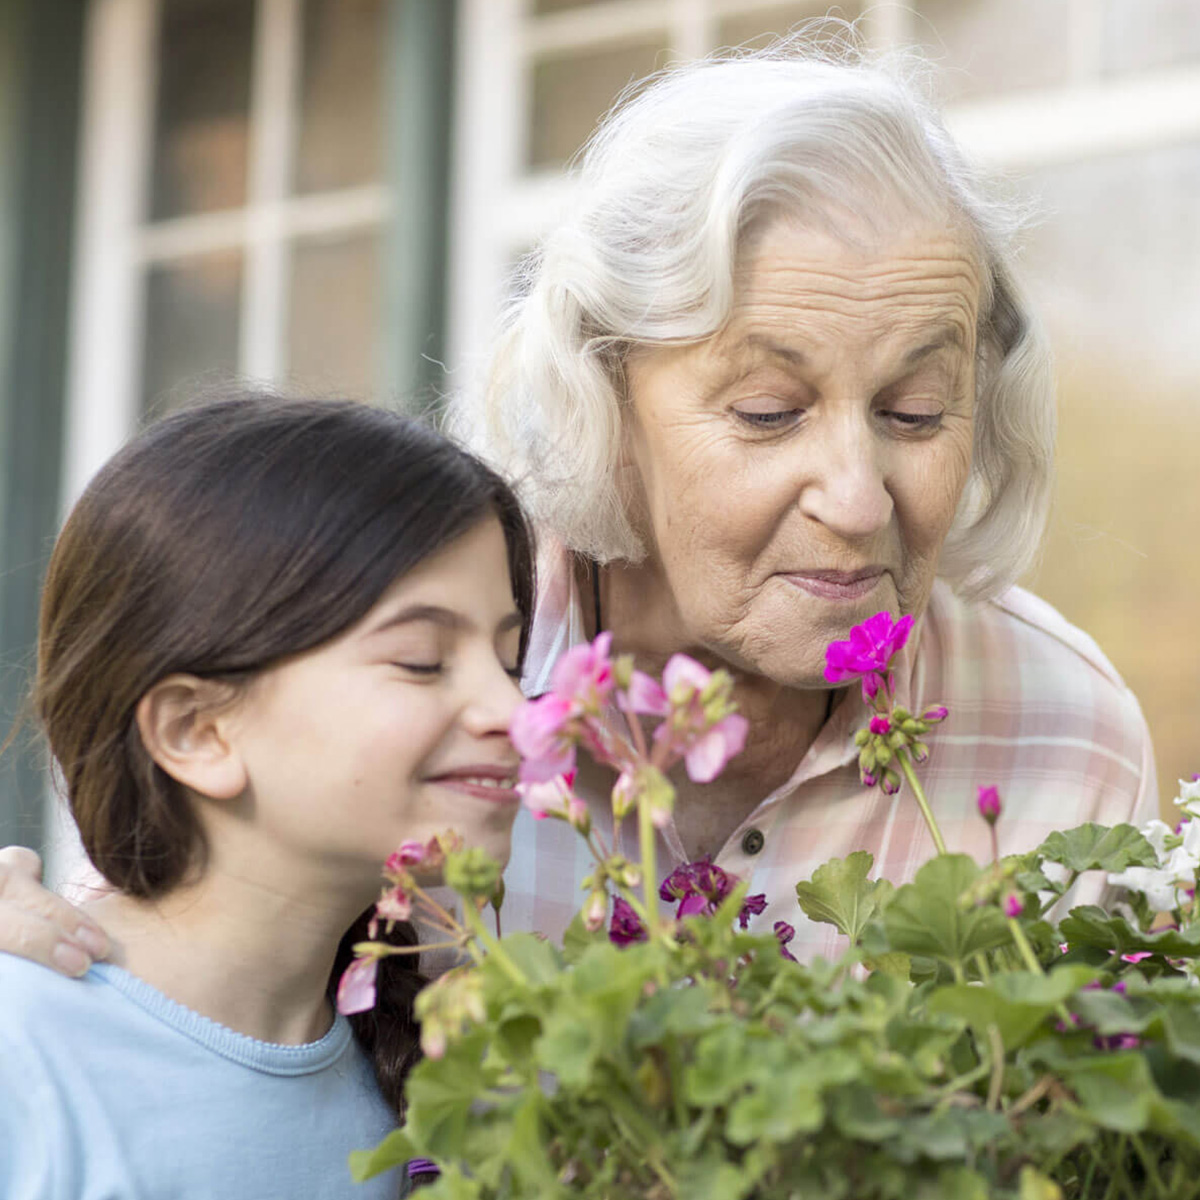 Grandmother and granddaughter smelling flowers outside the house.